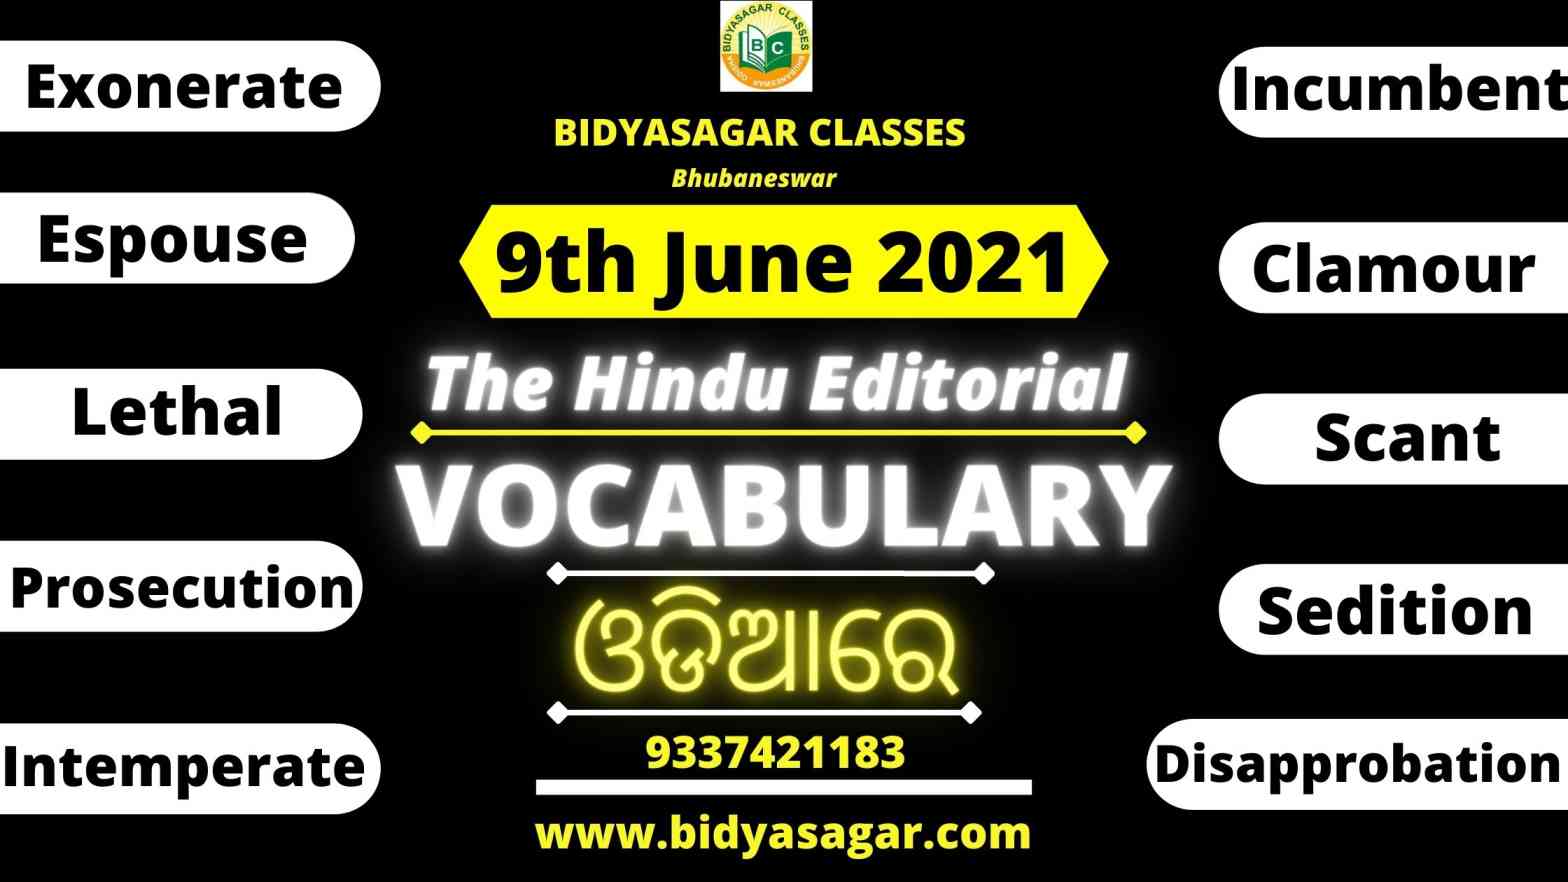 The Hindu Editorial Vocabulary of 9th June 2021